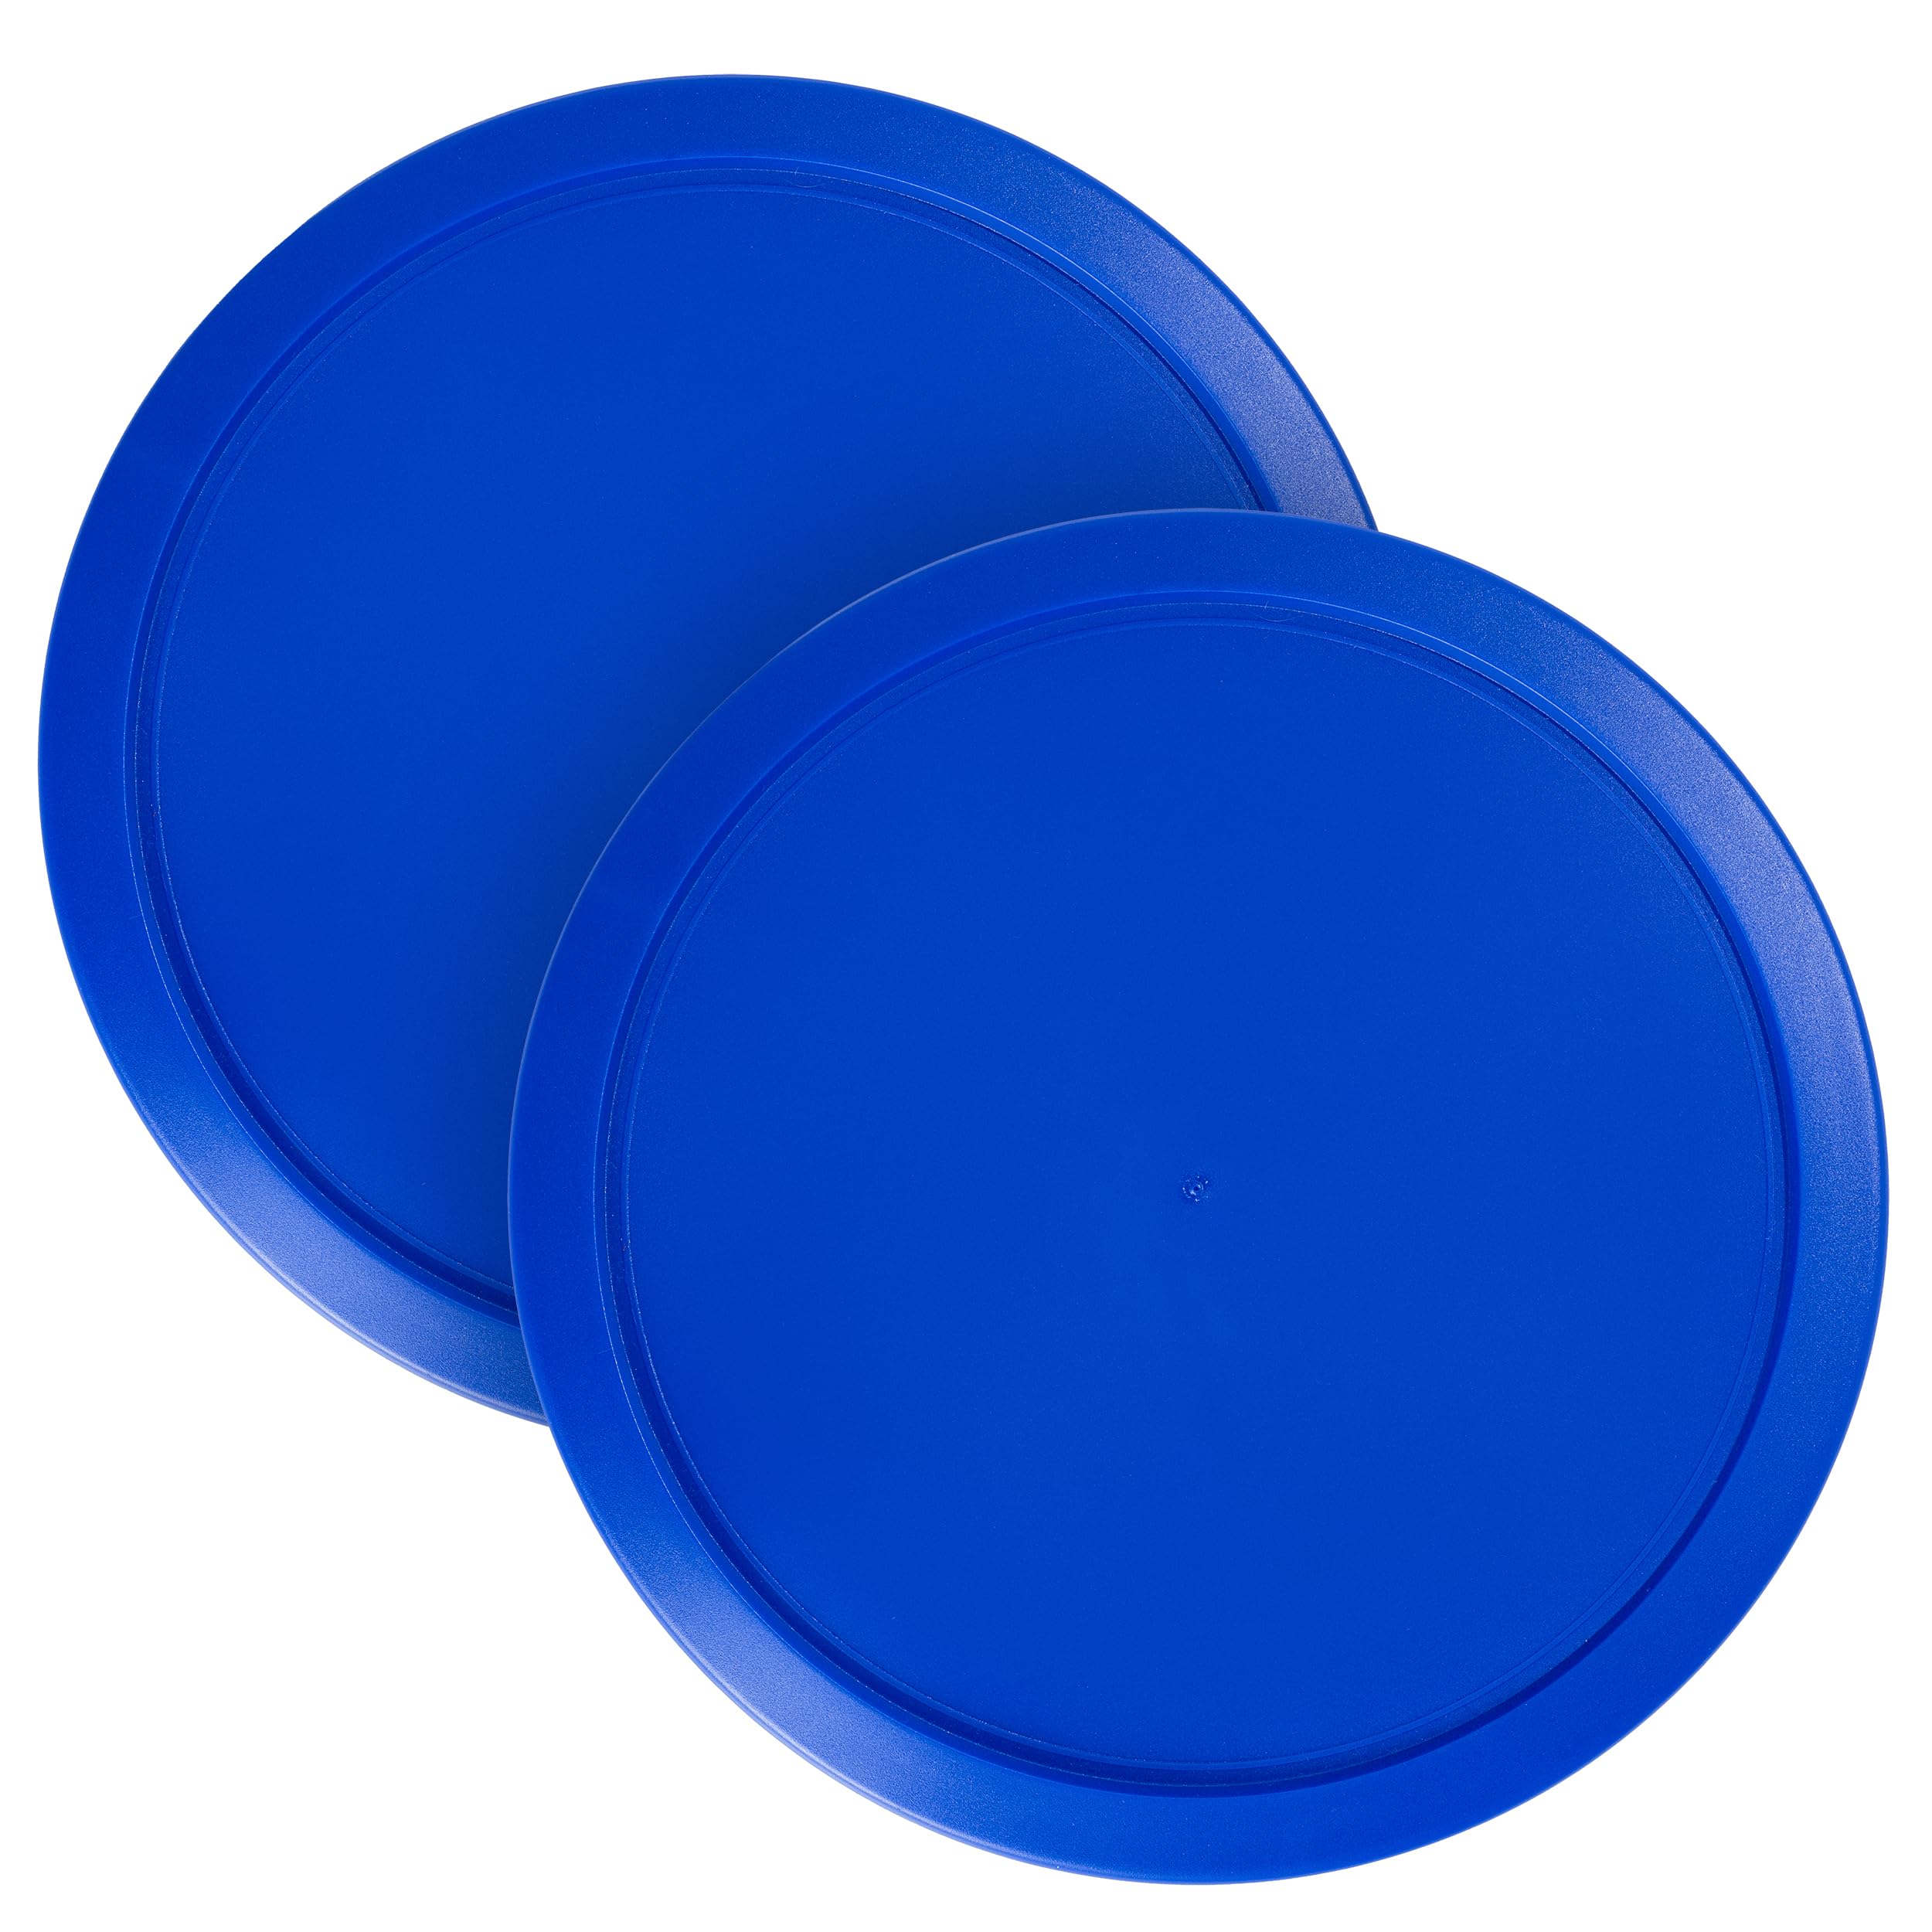 Replacement Lid for Pyrex 6 or 7 Cup Storage Plastic Cover Bowl Dish 7402-PC Blue (2-Pack)